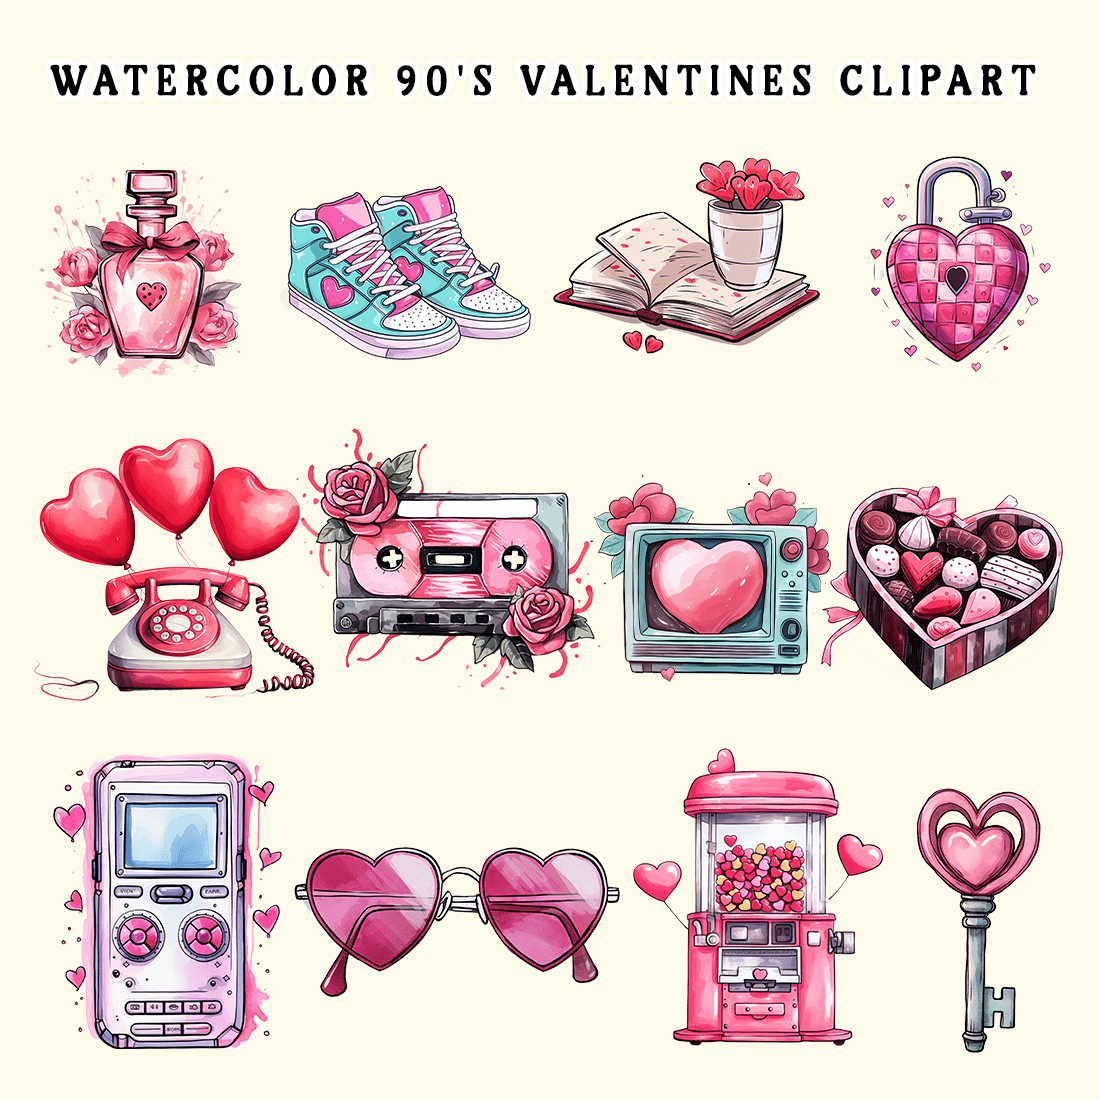 Watercolor 90's Valentines Clipart preview image.